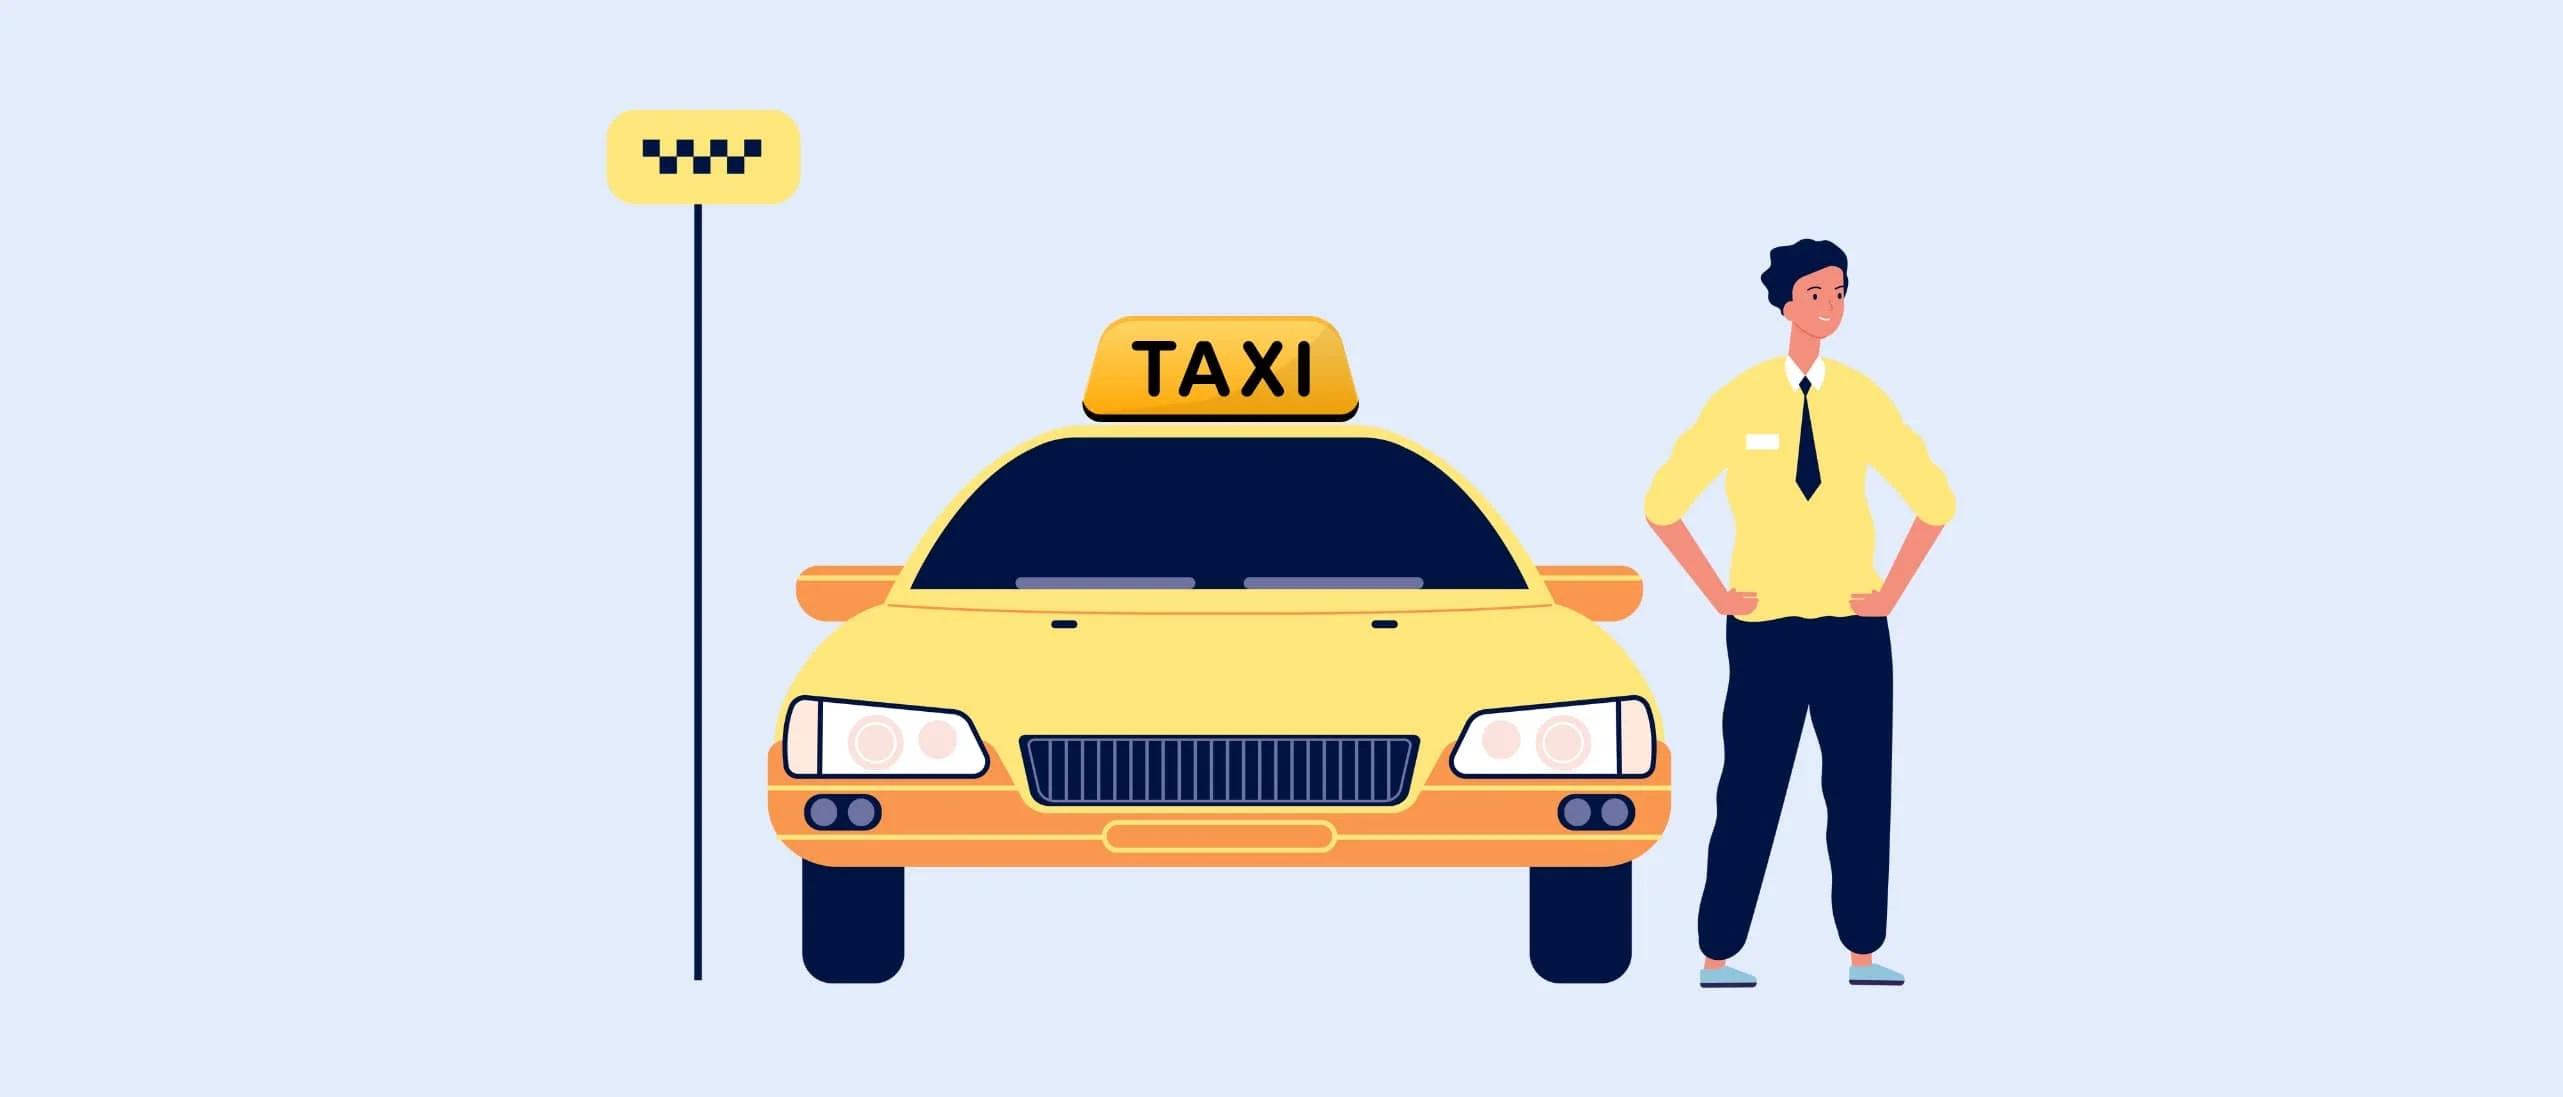 How to start a taxi business